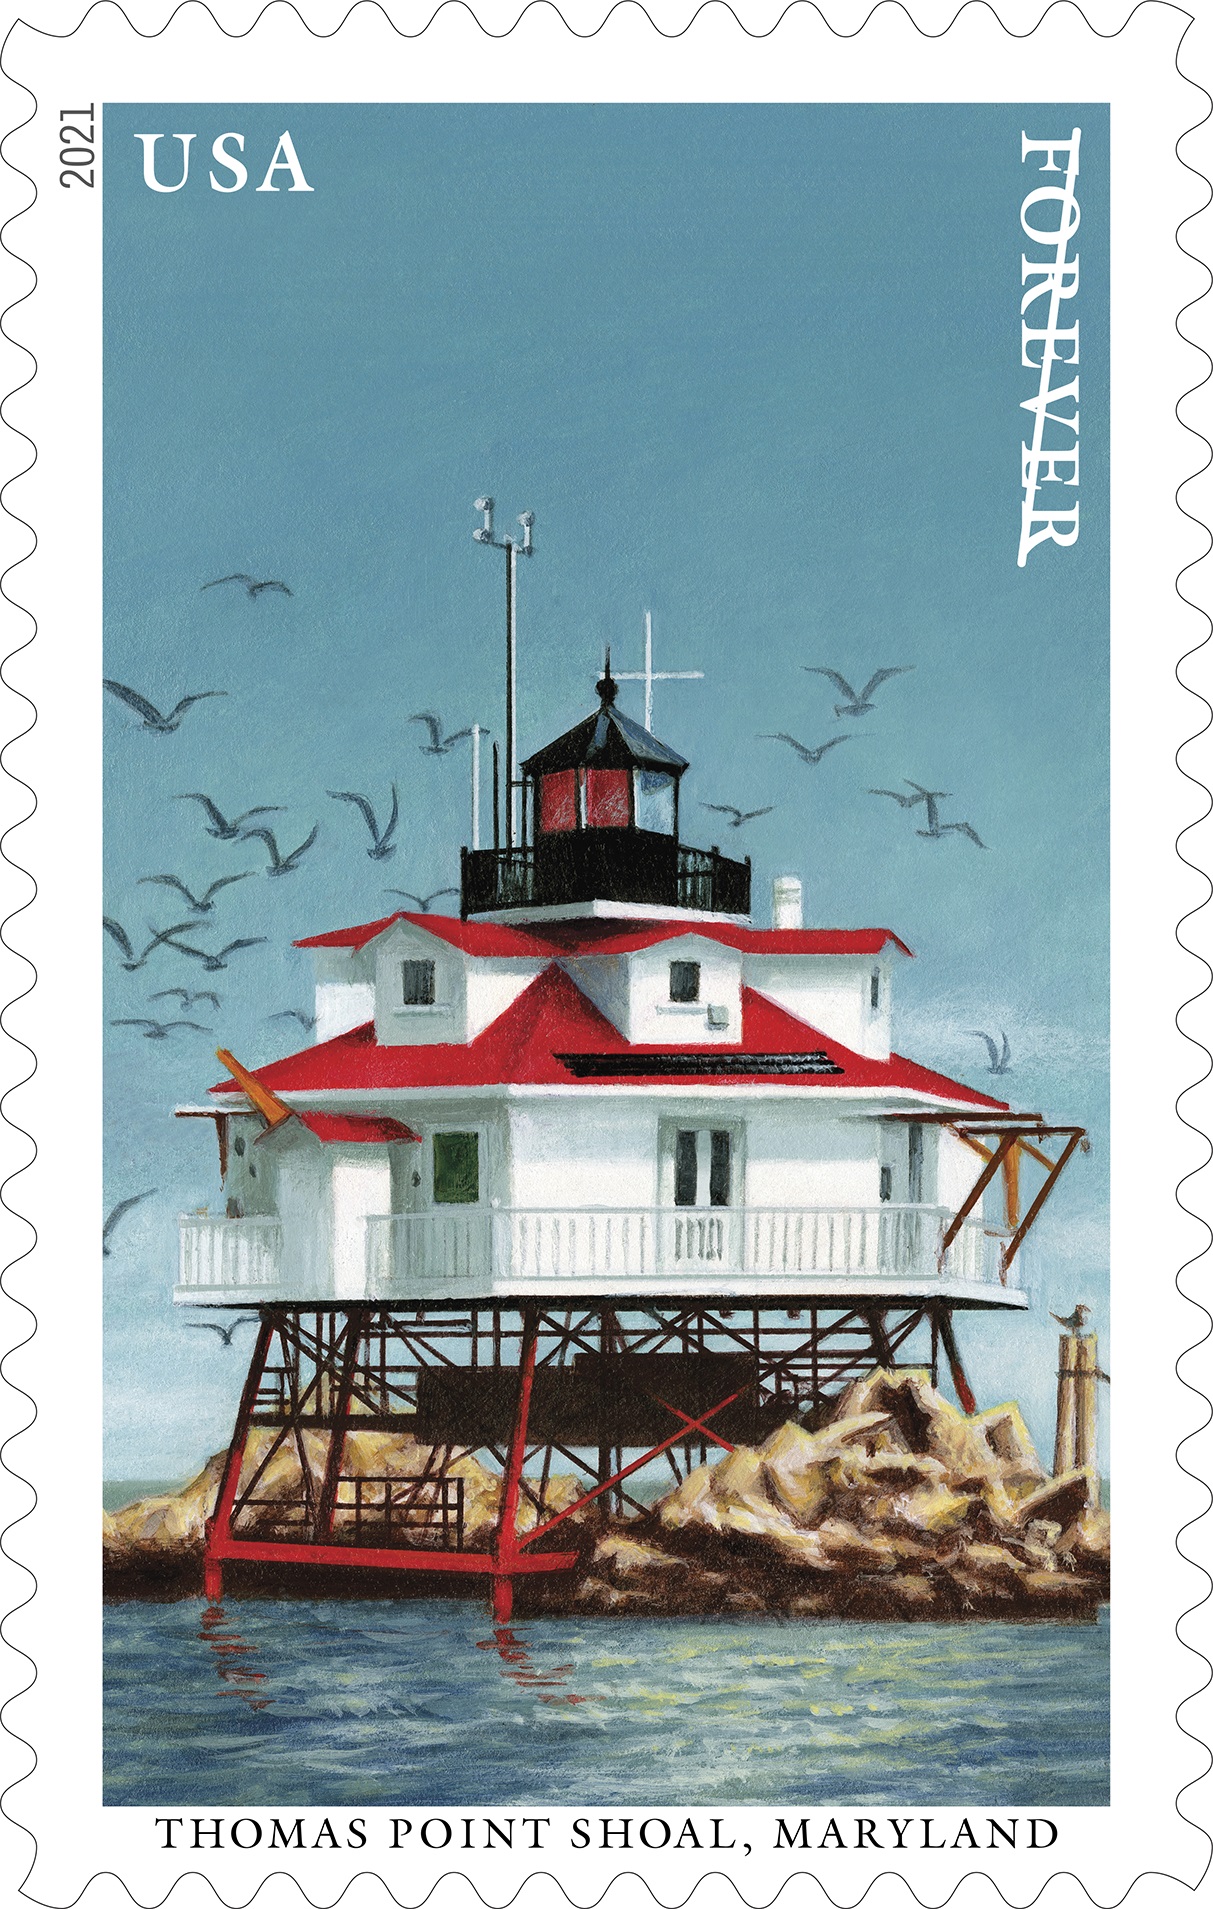 Thomas Point Light U.S. Postage Stamp to be Released